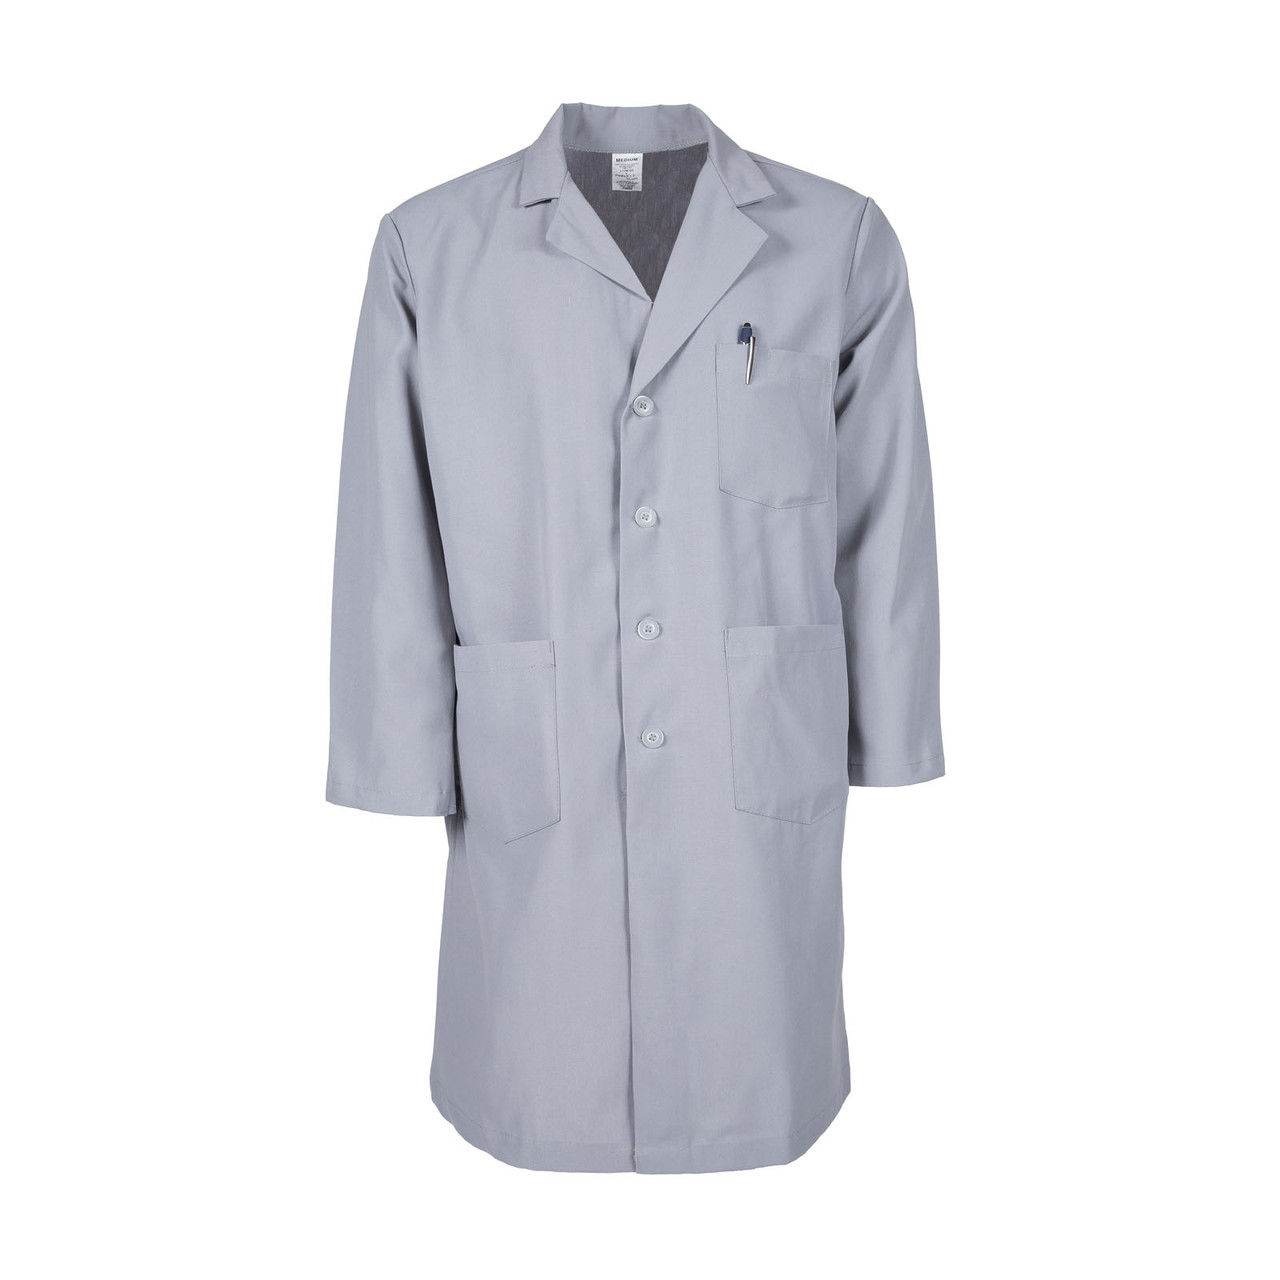 What do different color lab coats mean?